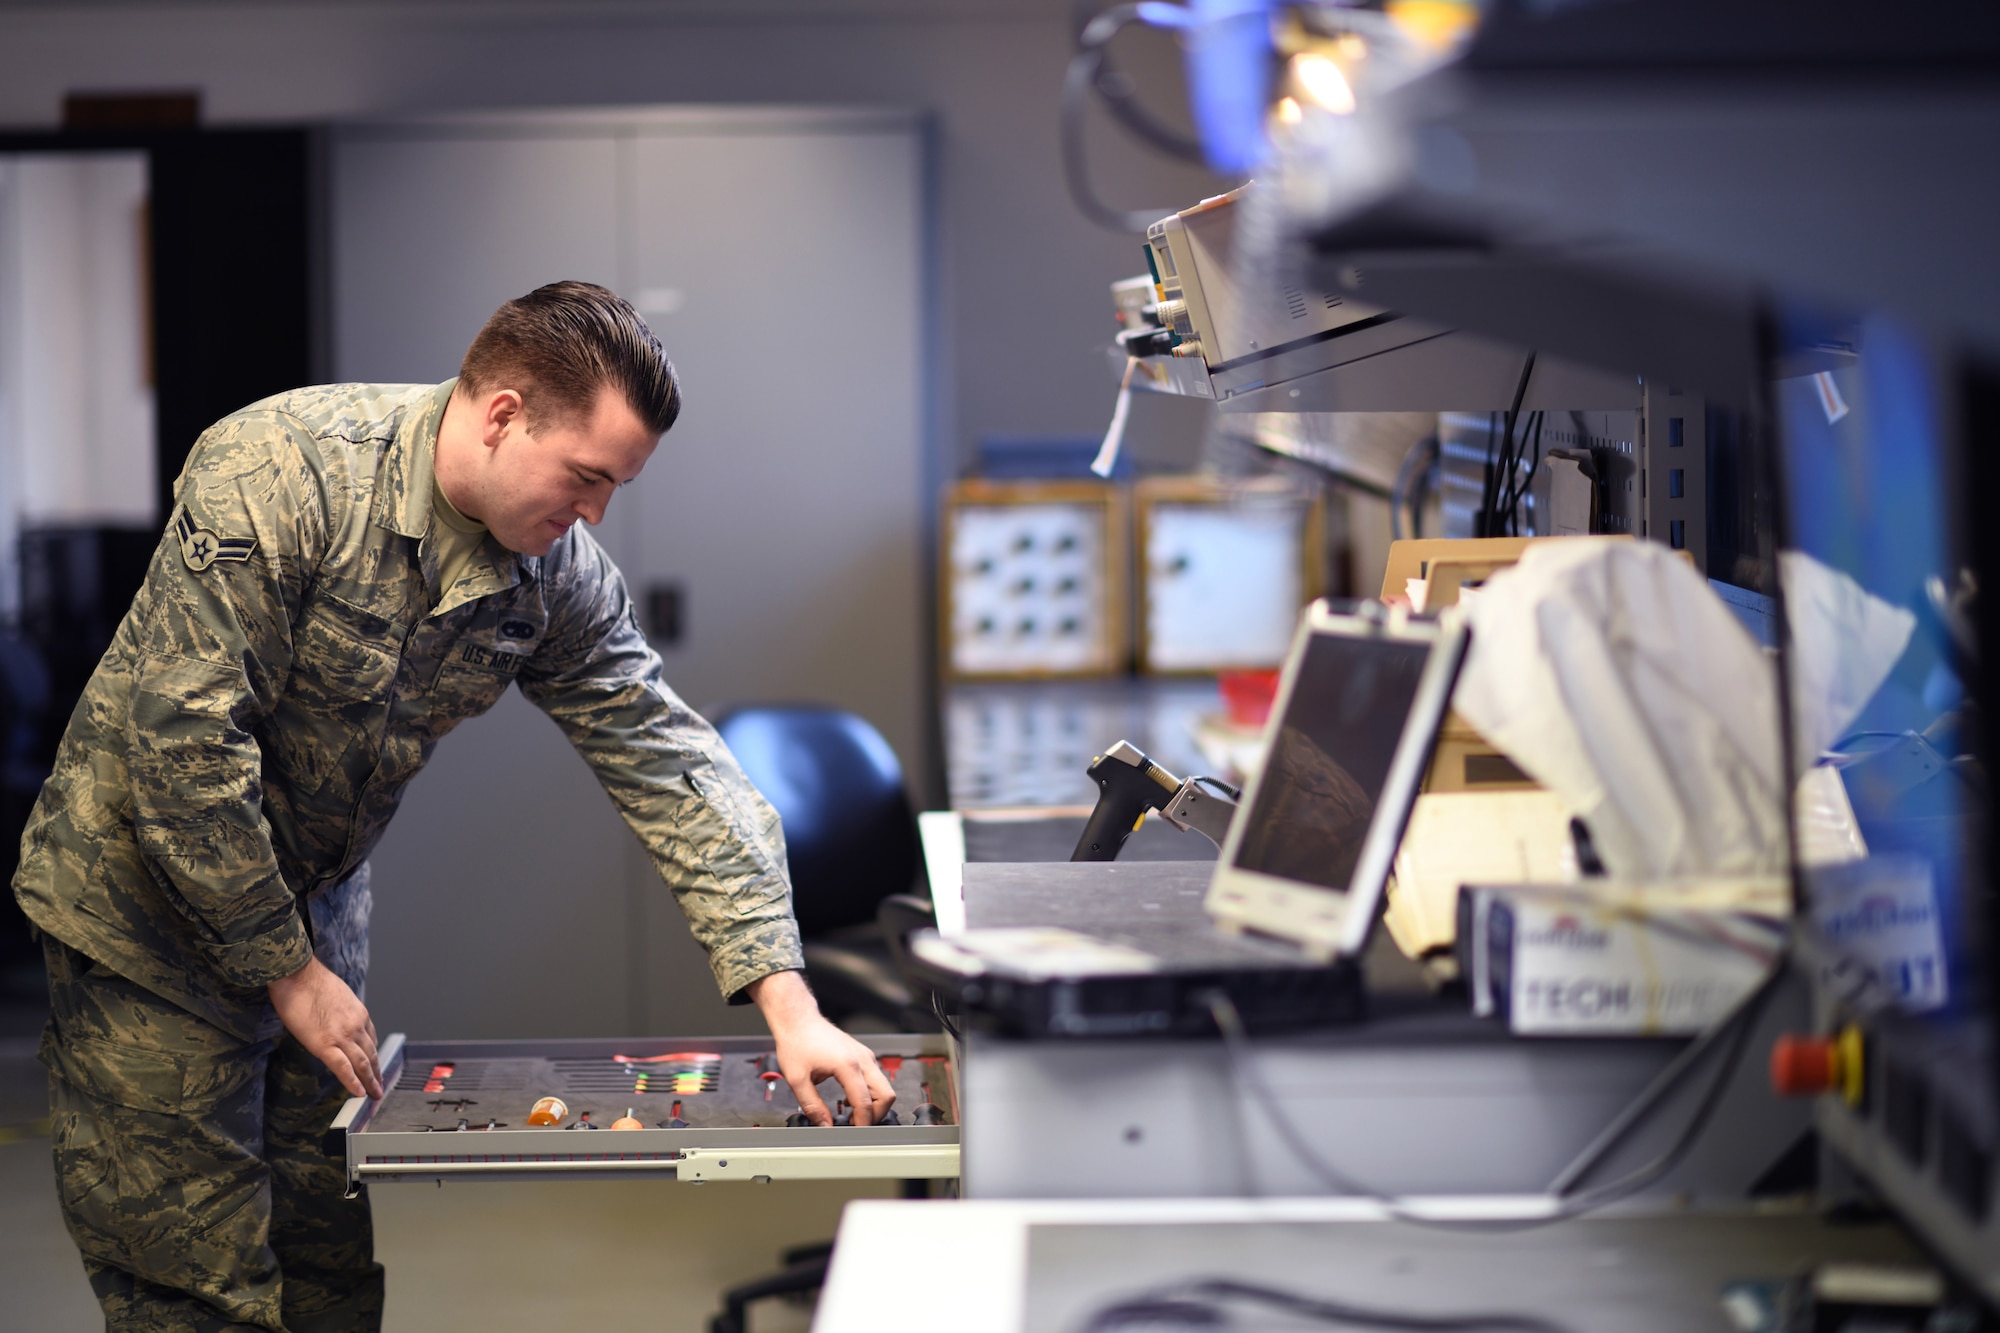 An Airman assigned to the 48th Component Maintenance Squadron’s Electrical and Environmental section searches for tools prior to an operations check on equipment at Royal Air Force Lakenheath, England, Jan. 23, 2019. The backshop provides support to over a dozen agencies, including the 492nd, 493rd and 494th Fighter Squadrons and the entire 48th Maintenance Group. (U.S. Air Force photo by Senior Airman Malcolm Mayfield)